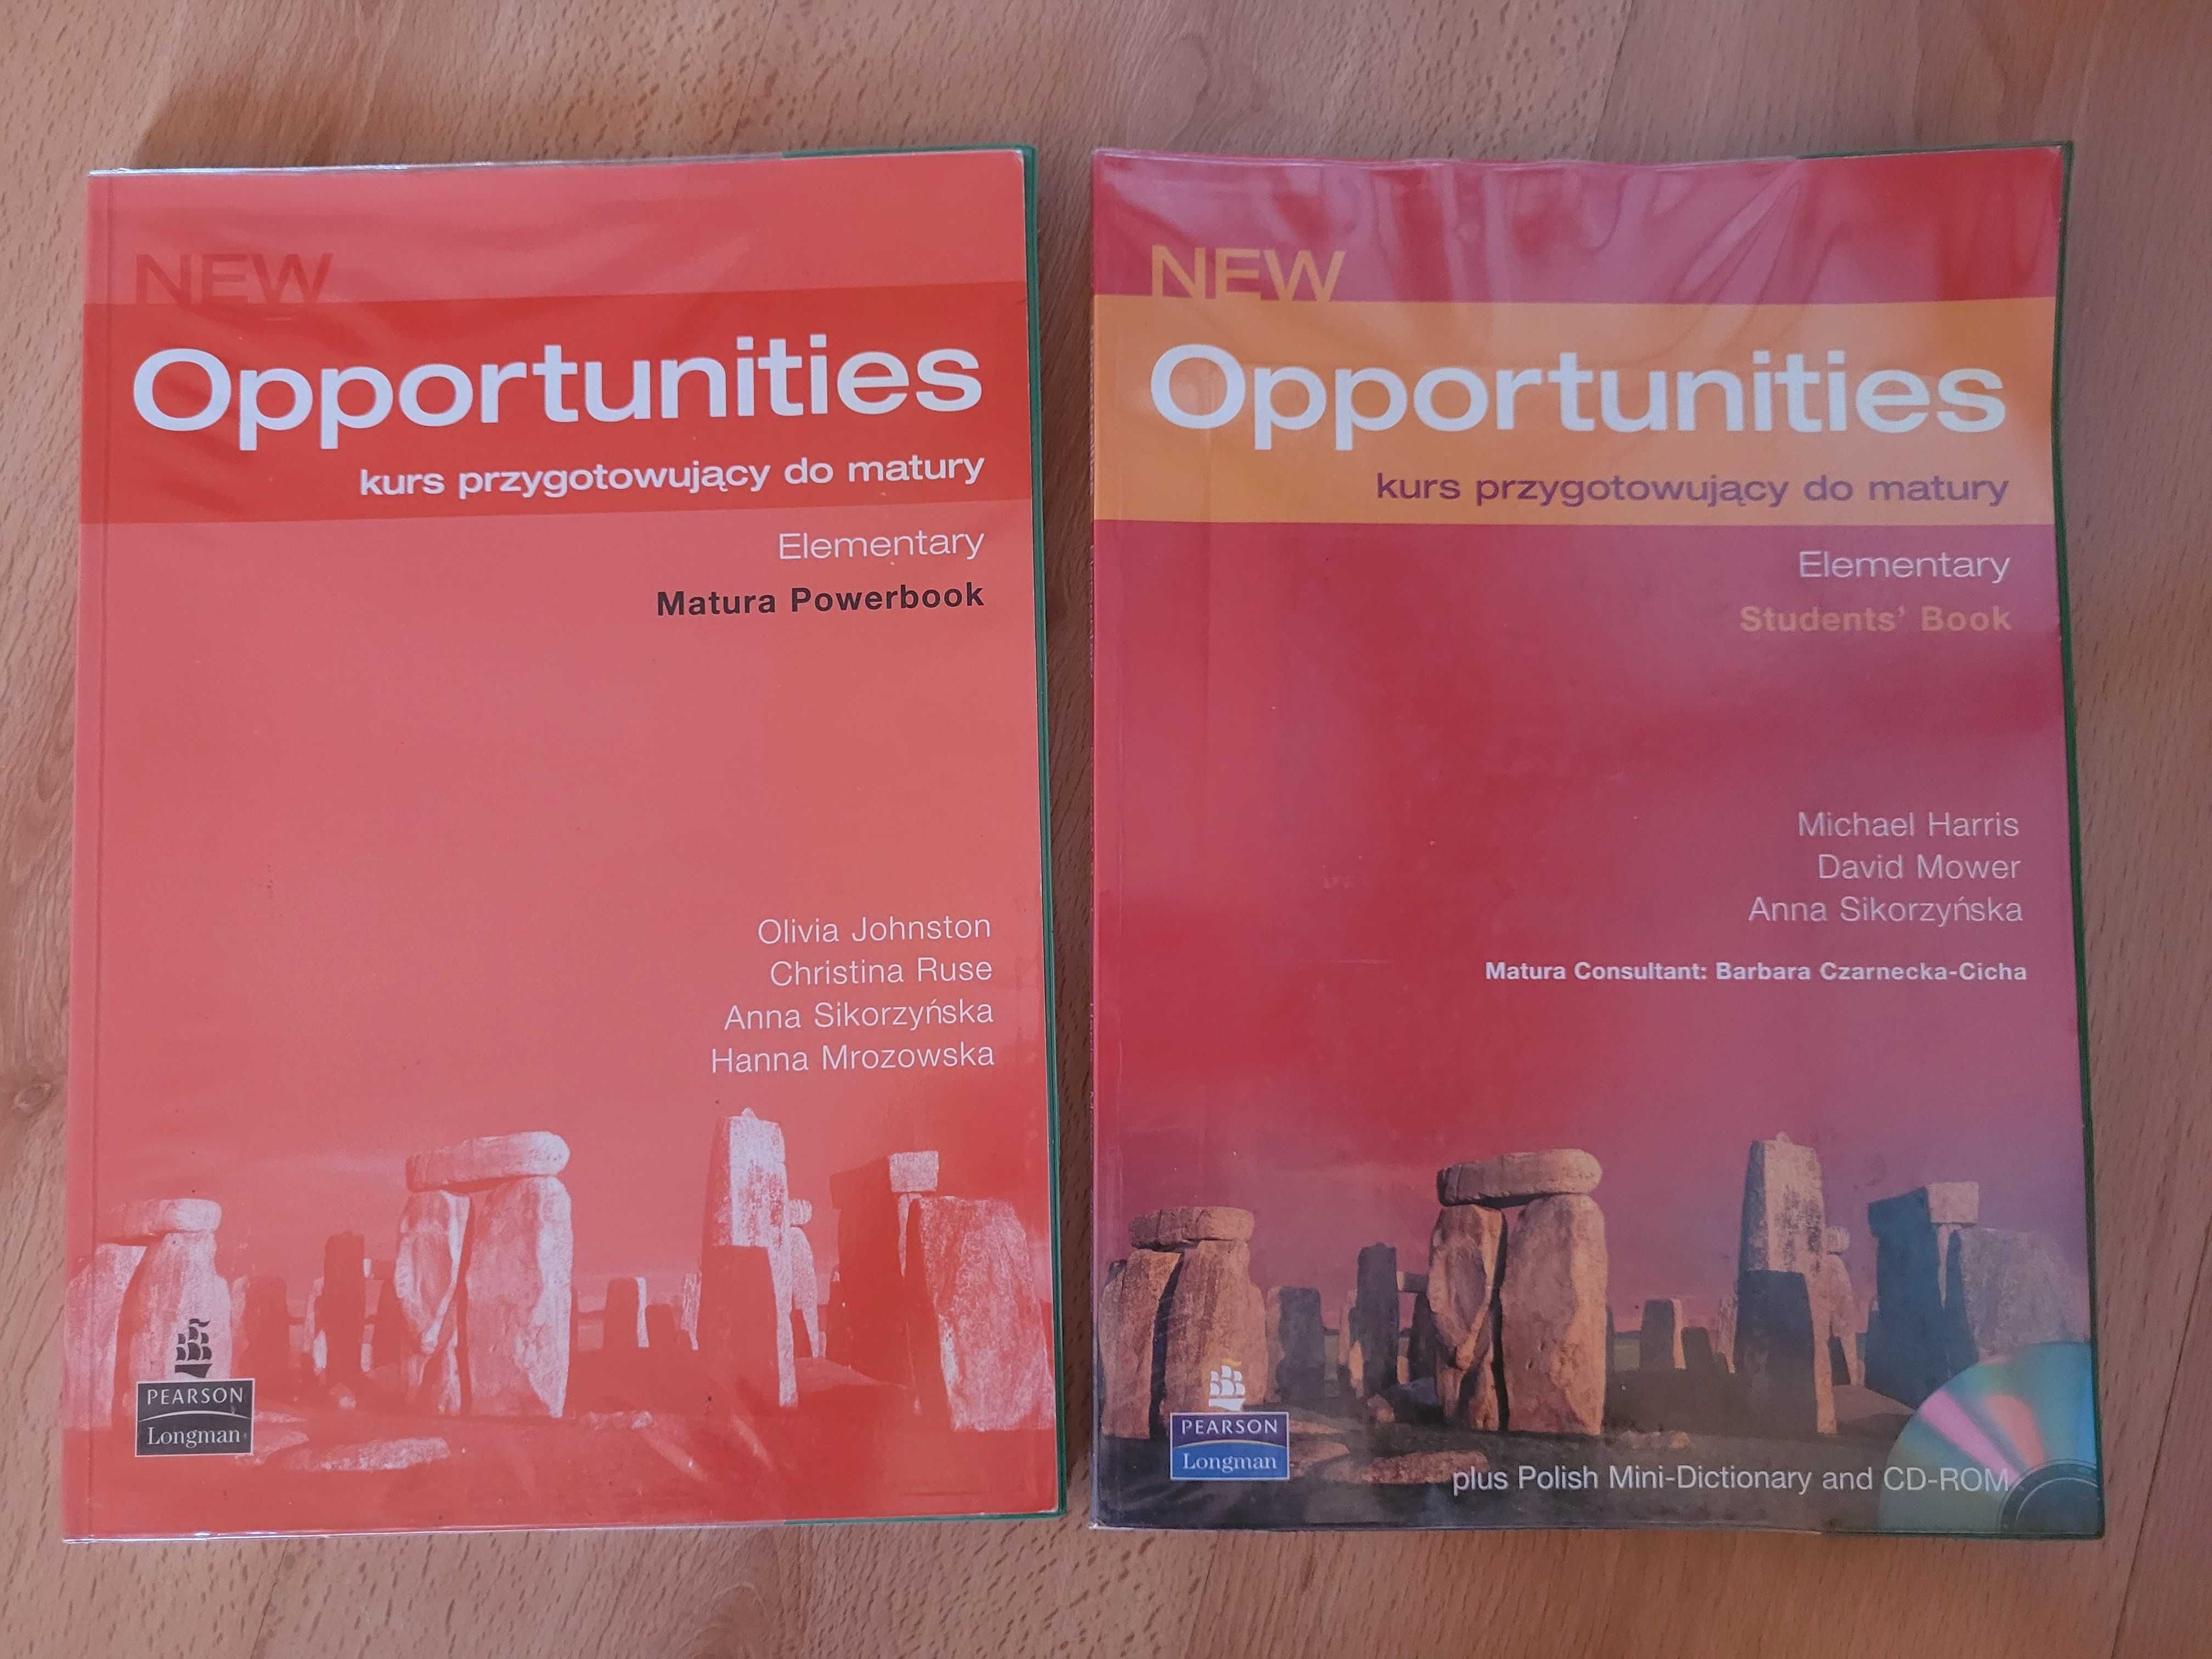 New opportunities elementary matura powerbook + students' book + cd